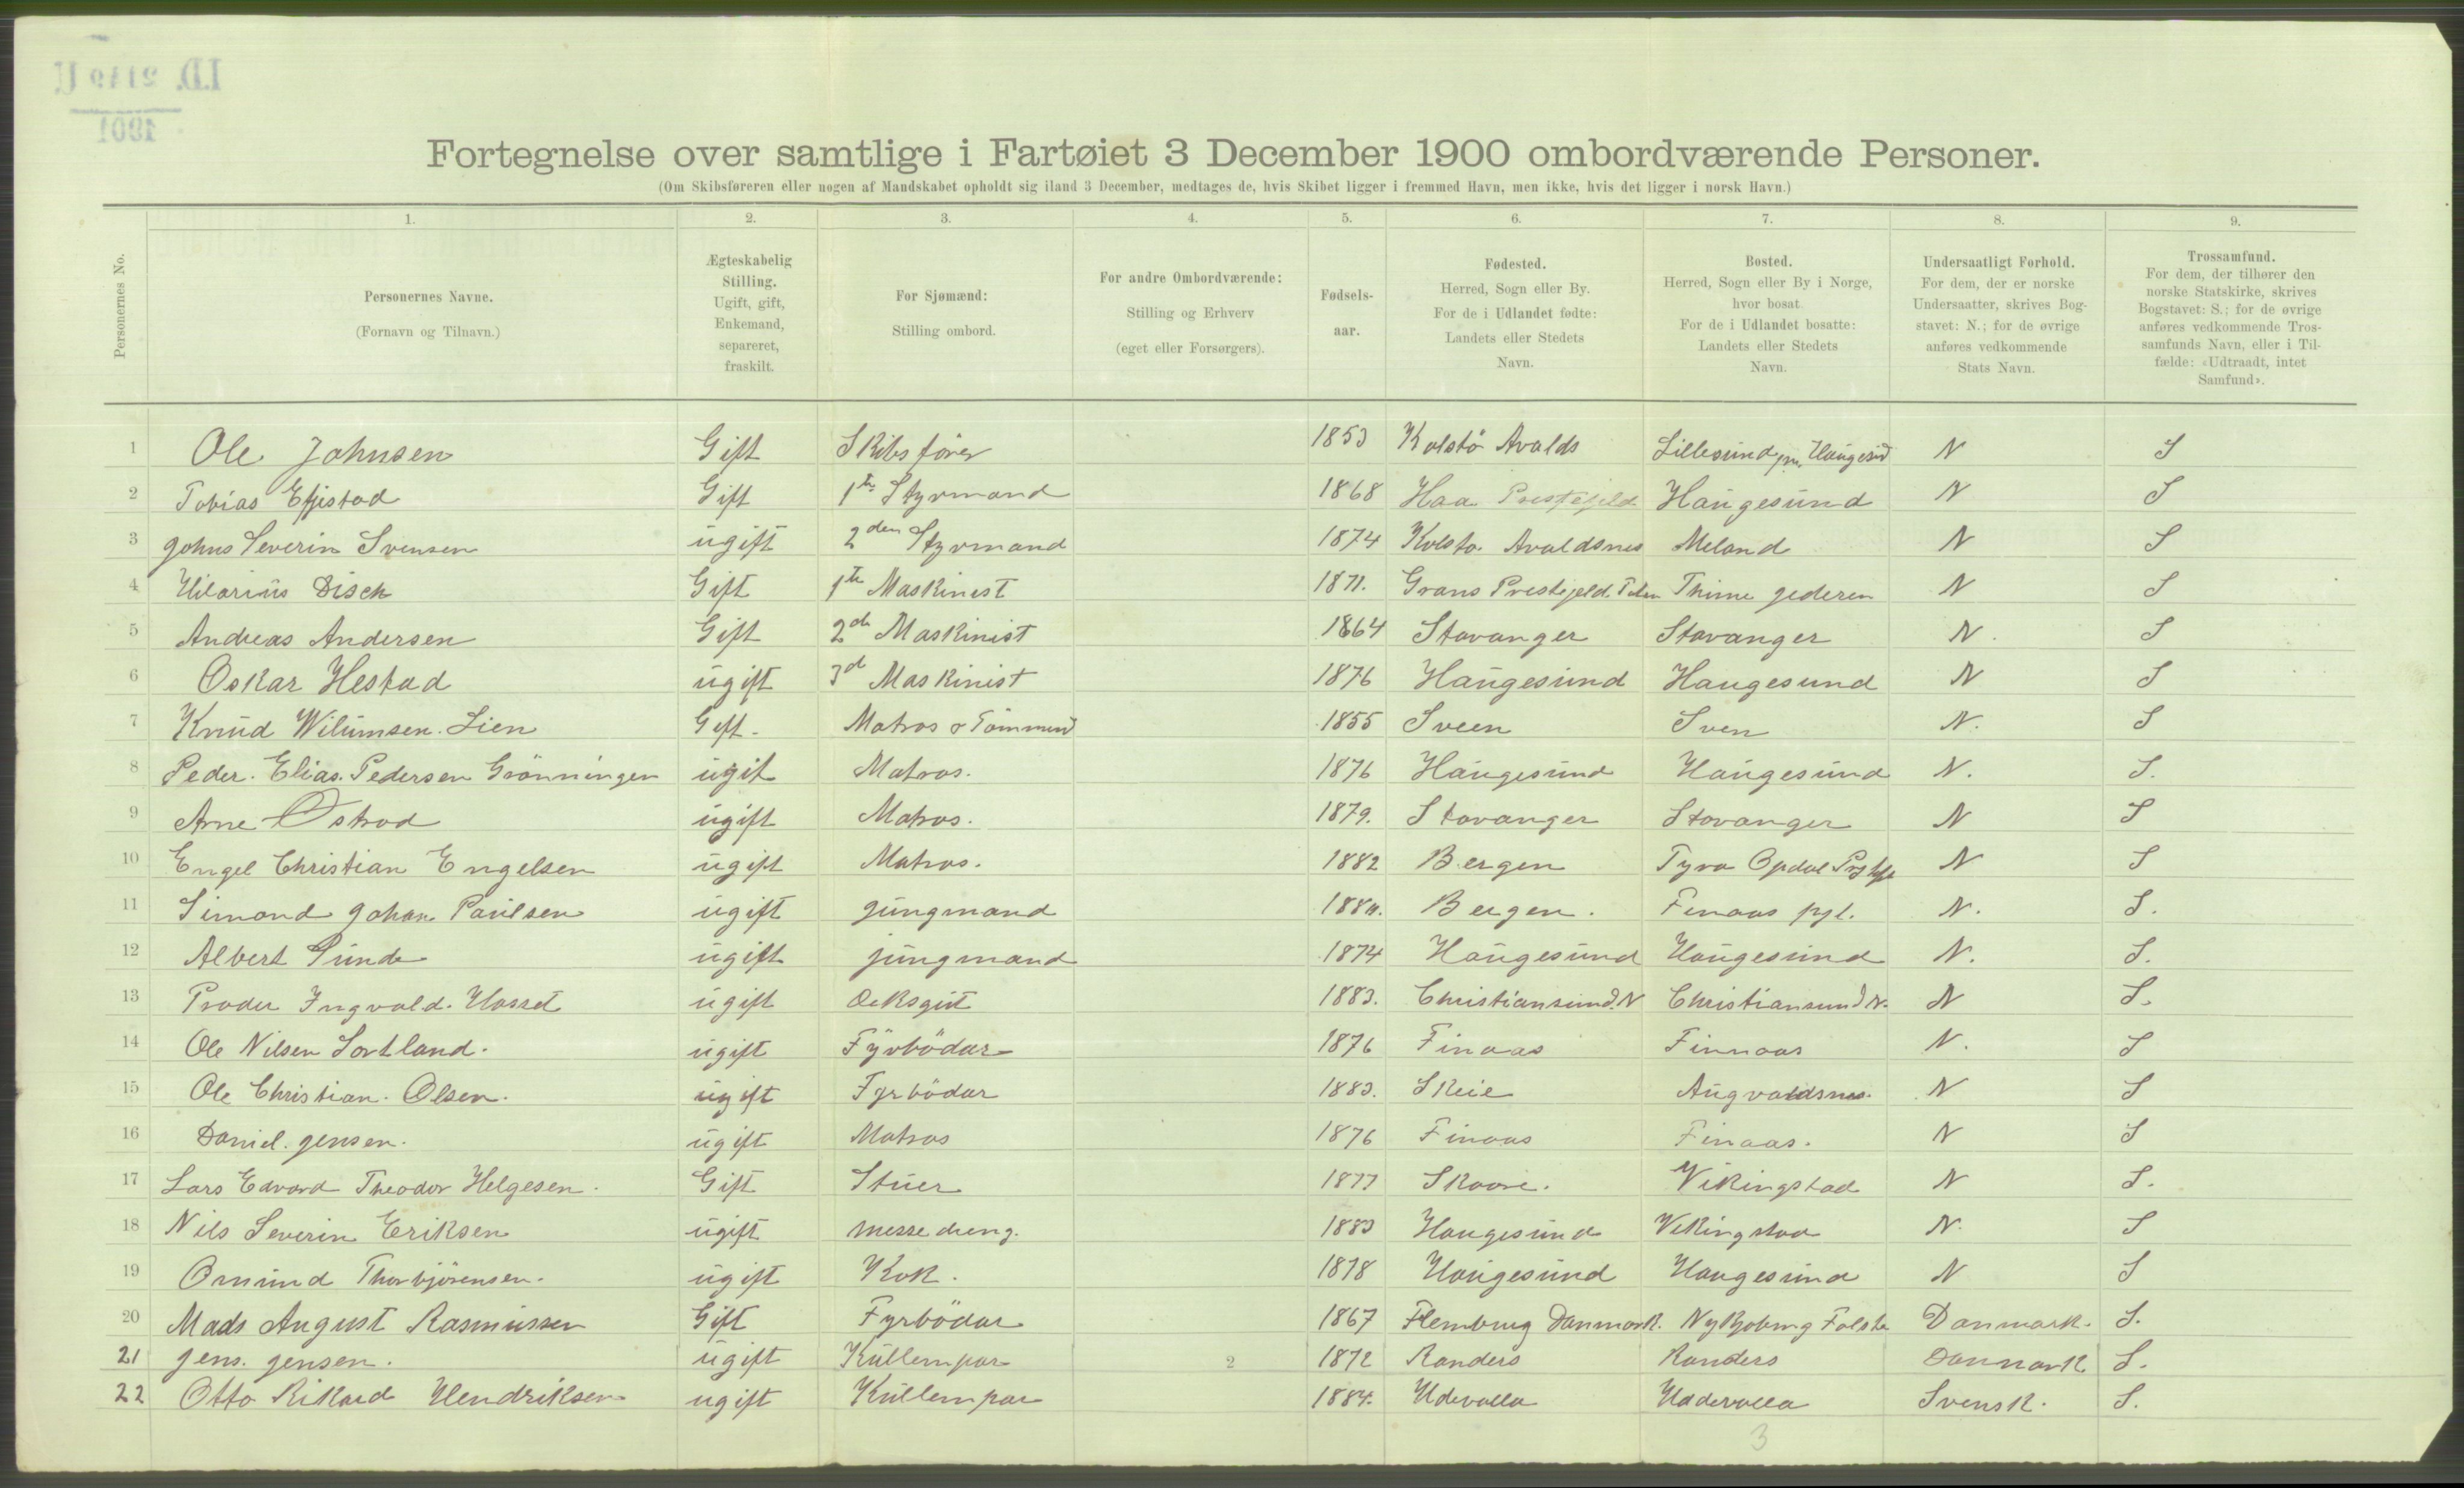 RA, 1900 Census - ship lists from ships in Norwegian harbours, harbours abroad and at sea, 1900, p. 3596